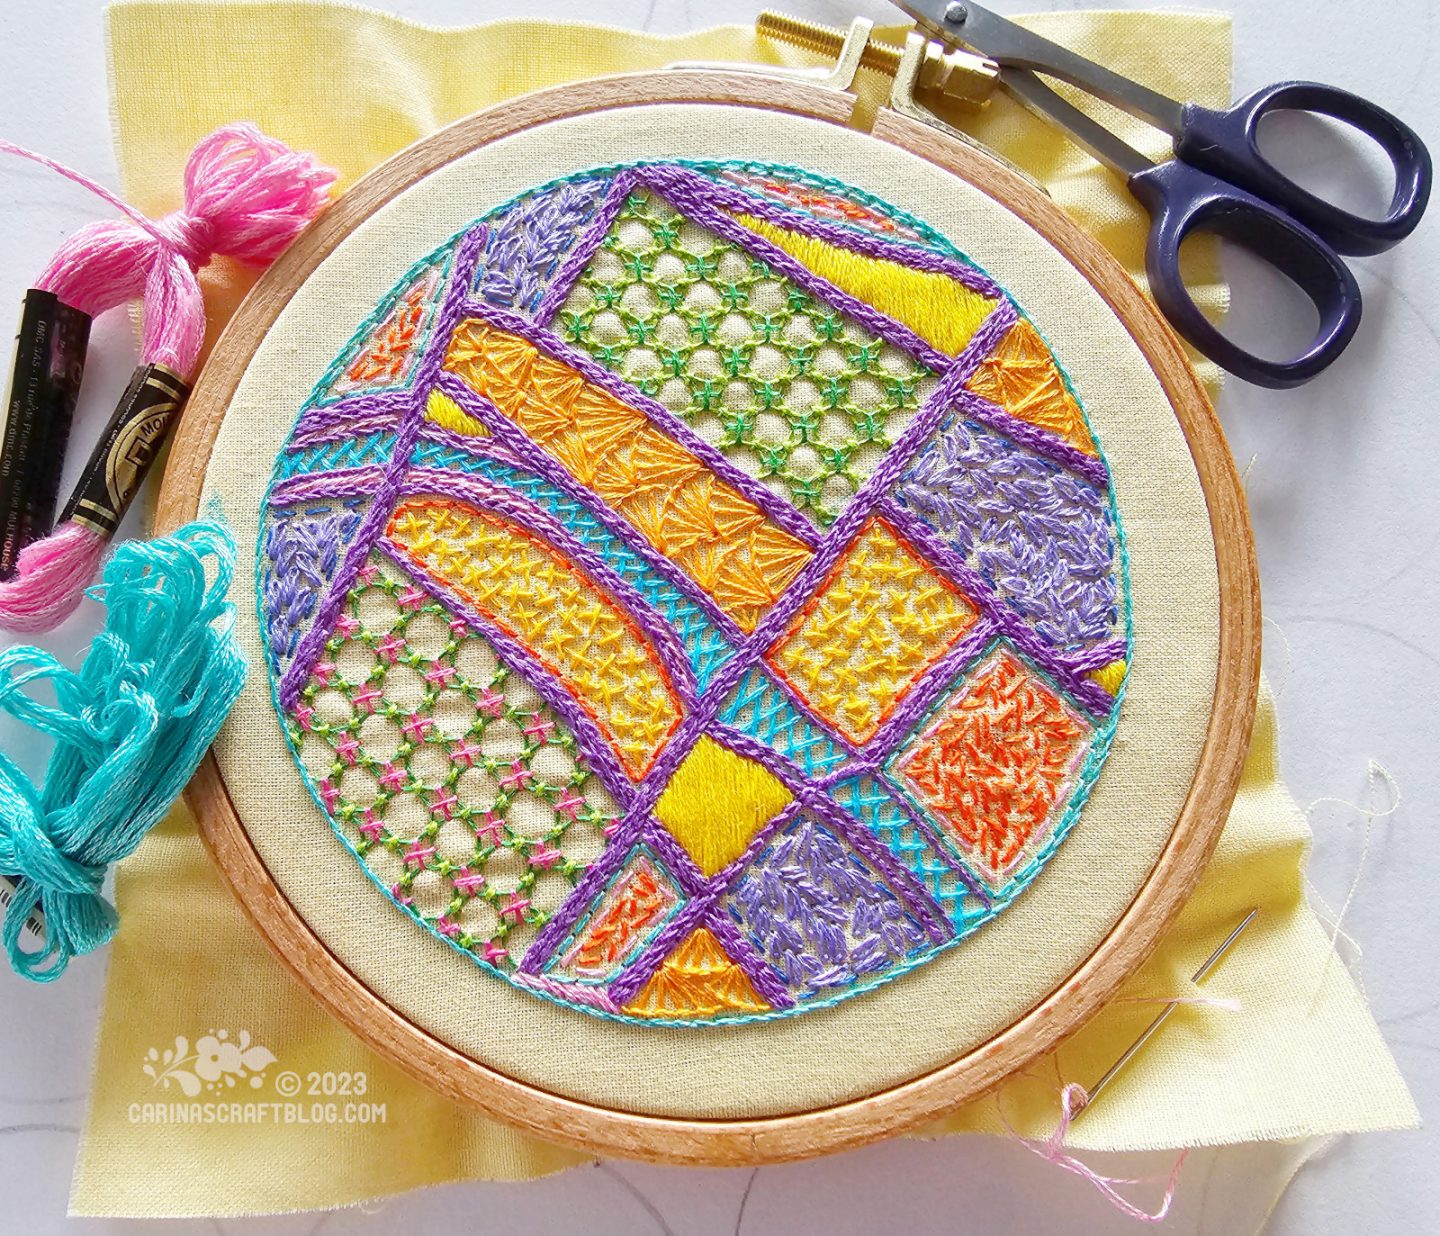 A wooden embroidery hoop with yellow fabric. On the fabric is embroidered a a map with purple thread for the roads and yellow, orange,, lilac and green colours fill in the areas between the roads.